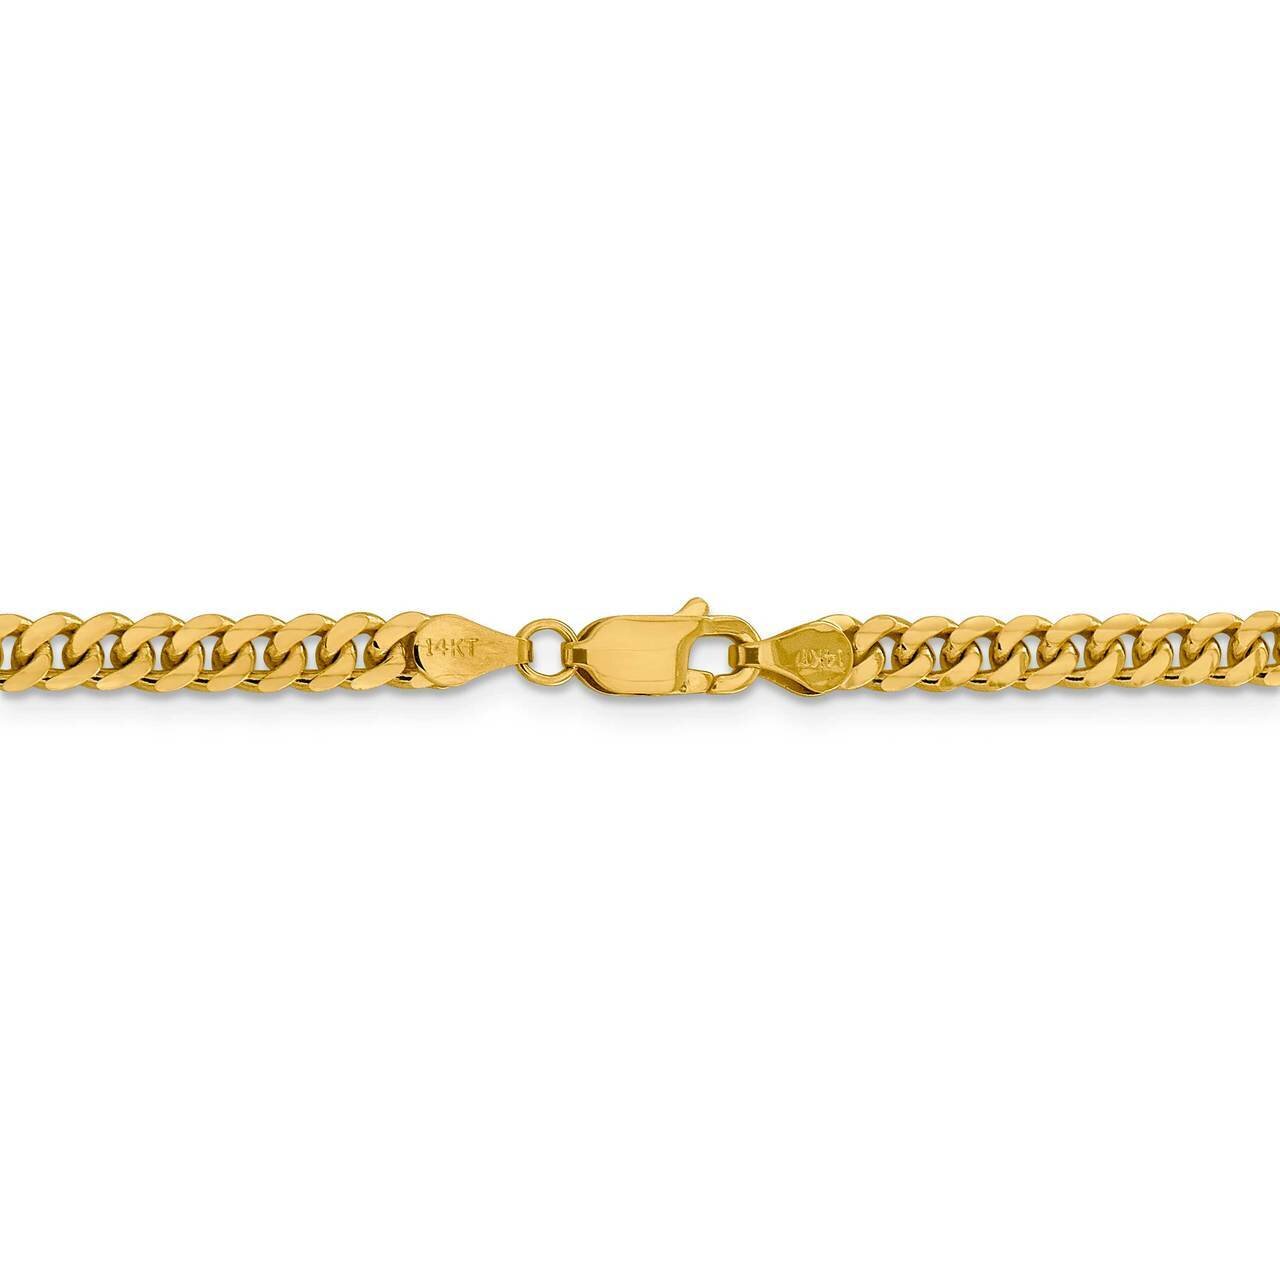 26 Inch 4.25mm Solid Miami Cuban Chain 14k Yellow Gold DCU120-26